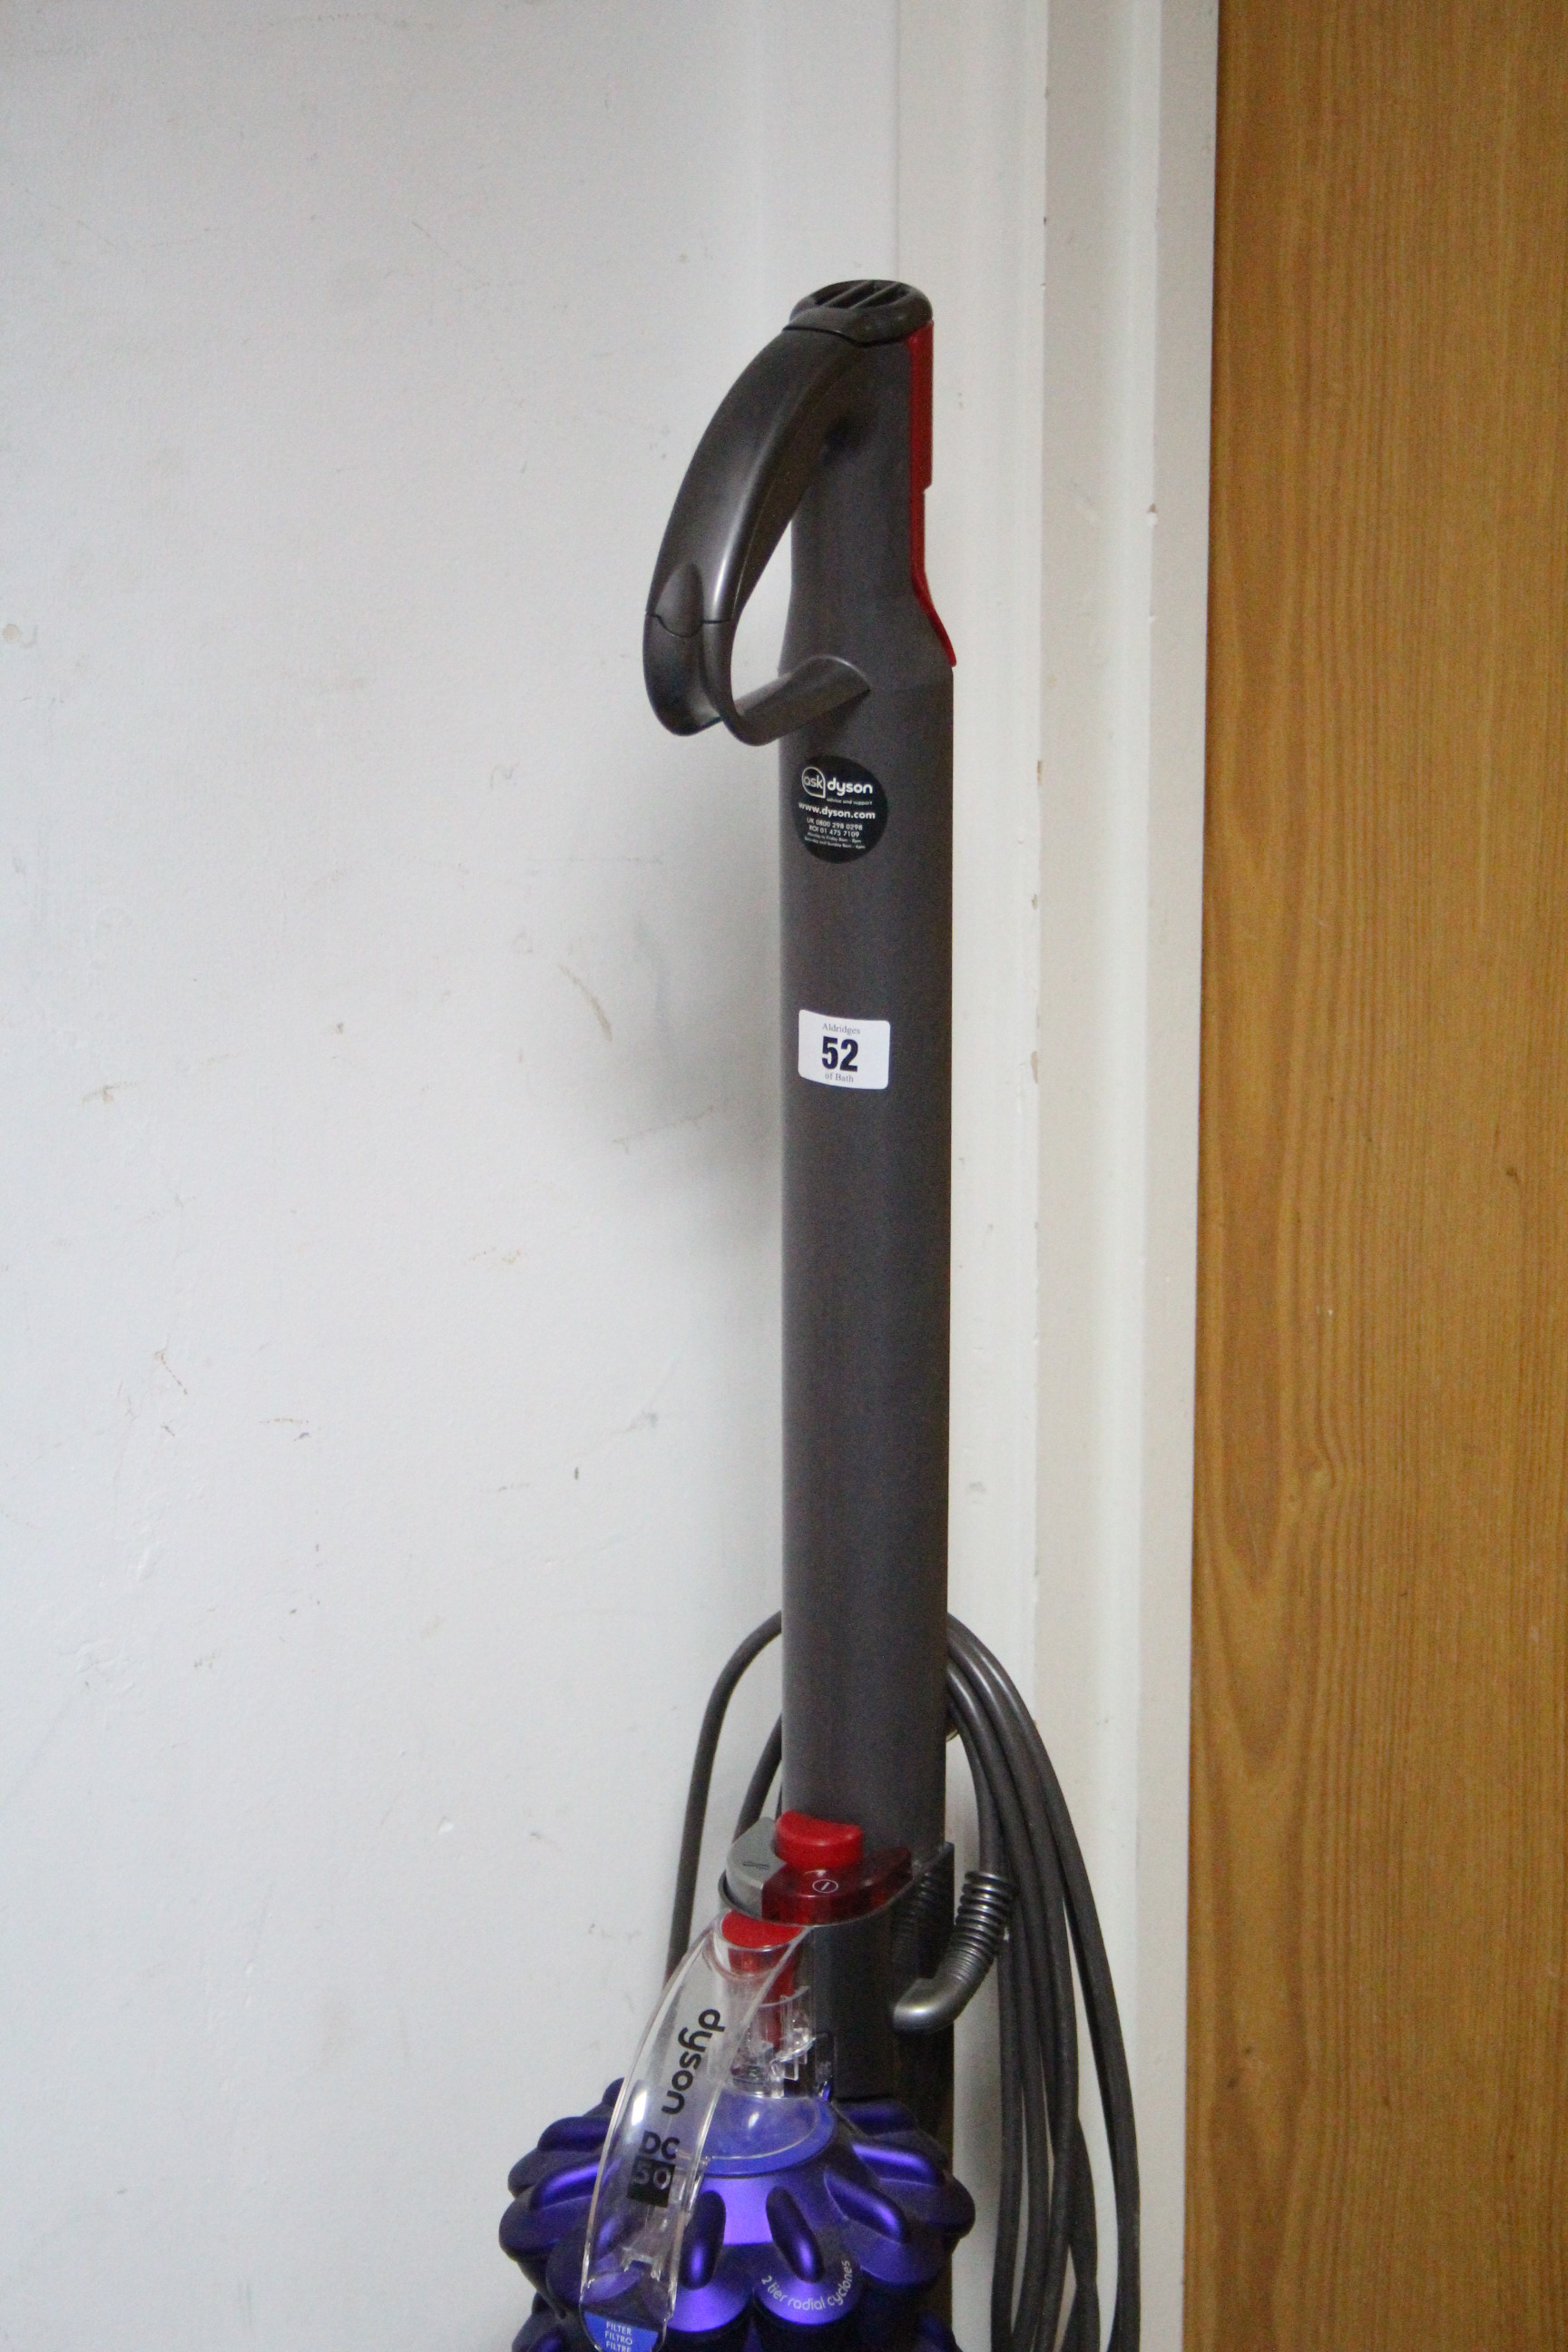 A Dyson “DC50” upright vacuum cleaner, w.o. - Image 3 of 3